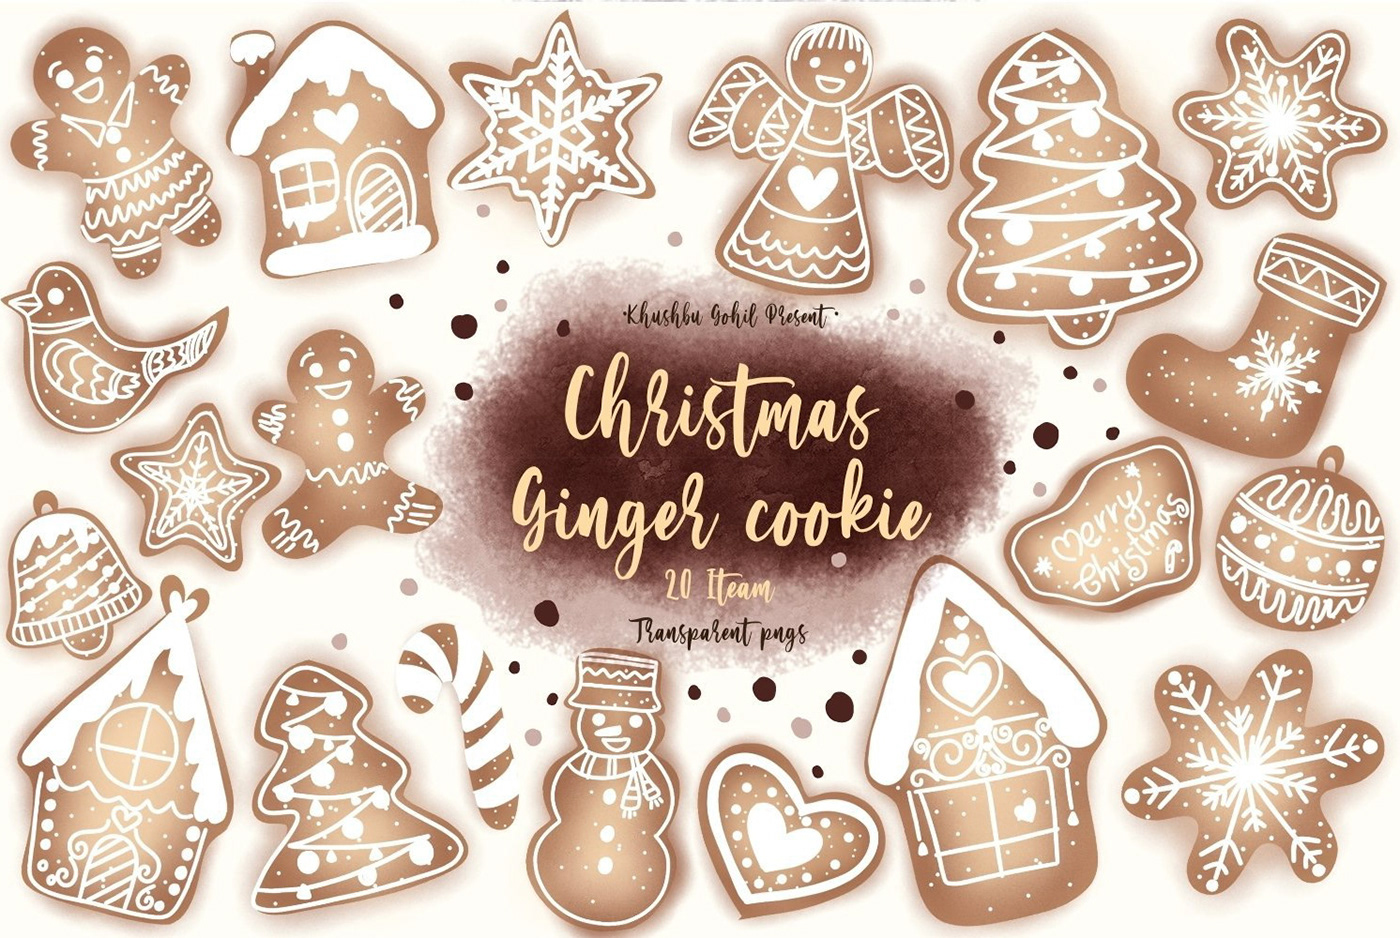 Christmas clipart cliparts cookies Food  ILLUSTRATION  illustrations Illustrator packing Wrapping paper